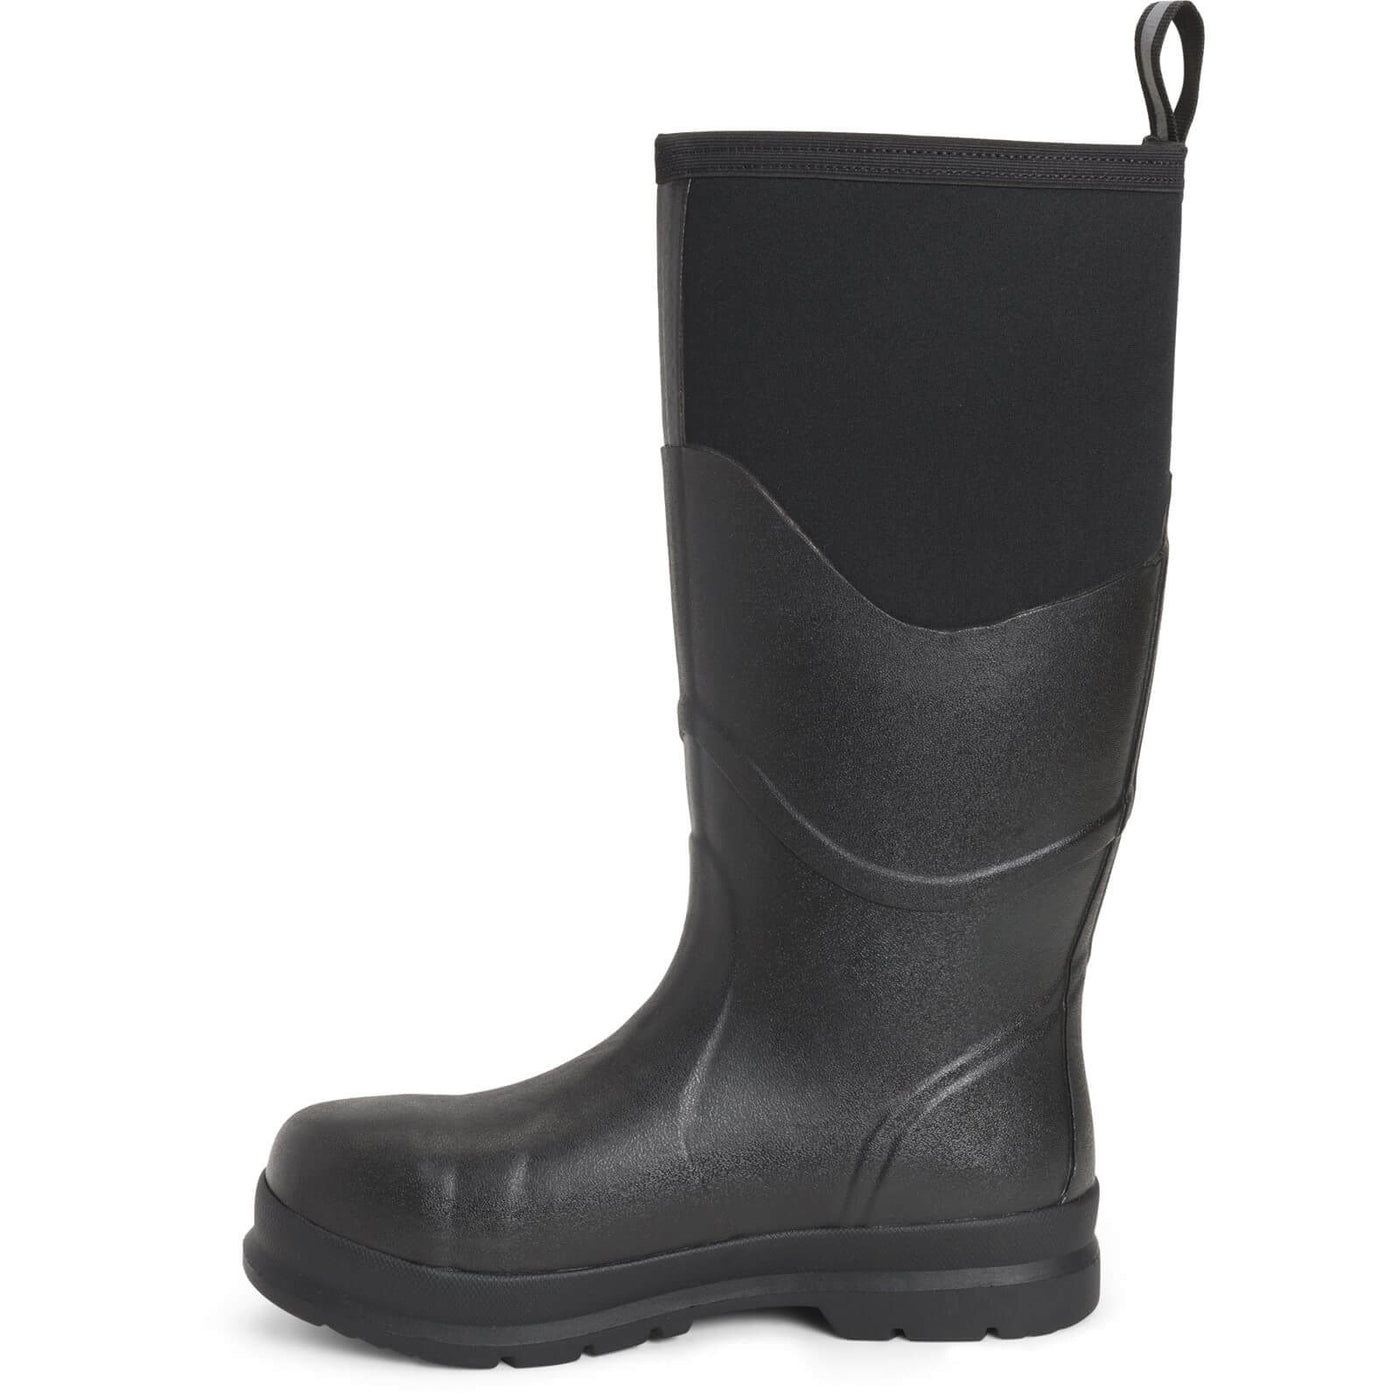 Muck Boots Chore Max S5 Safety Wellies Black 7#colour_black